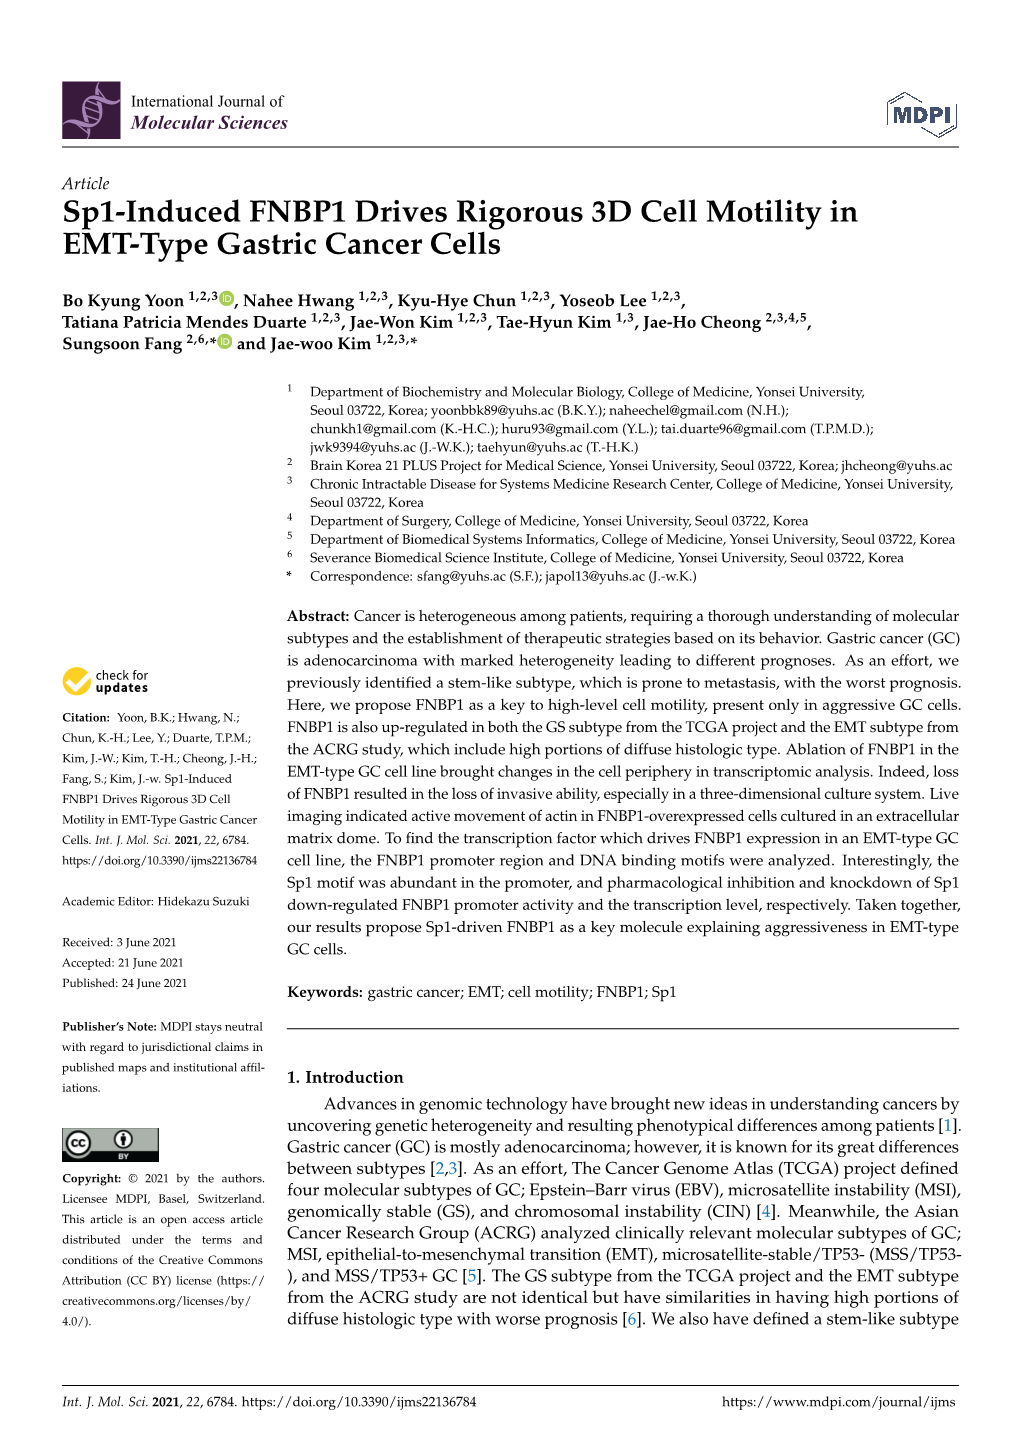 Sp1-Induced FNBP1 Drives Rigorous 3D Cell Motility in EMT-Type Gastric Cancer Cells